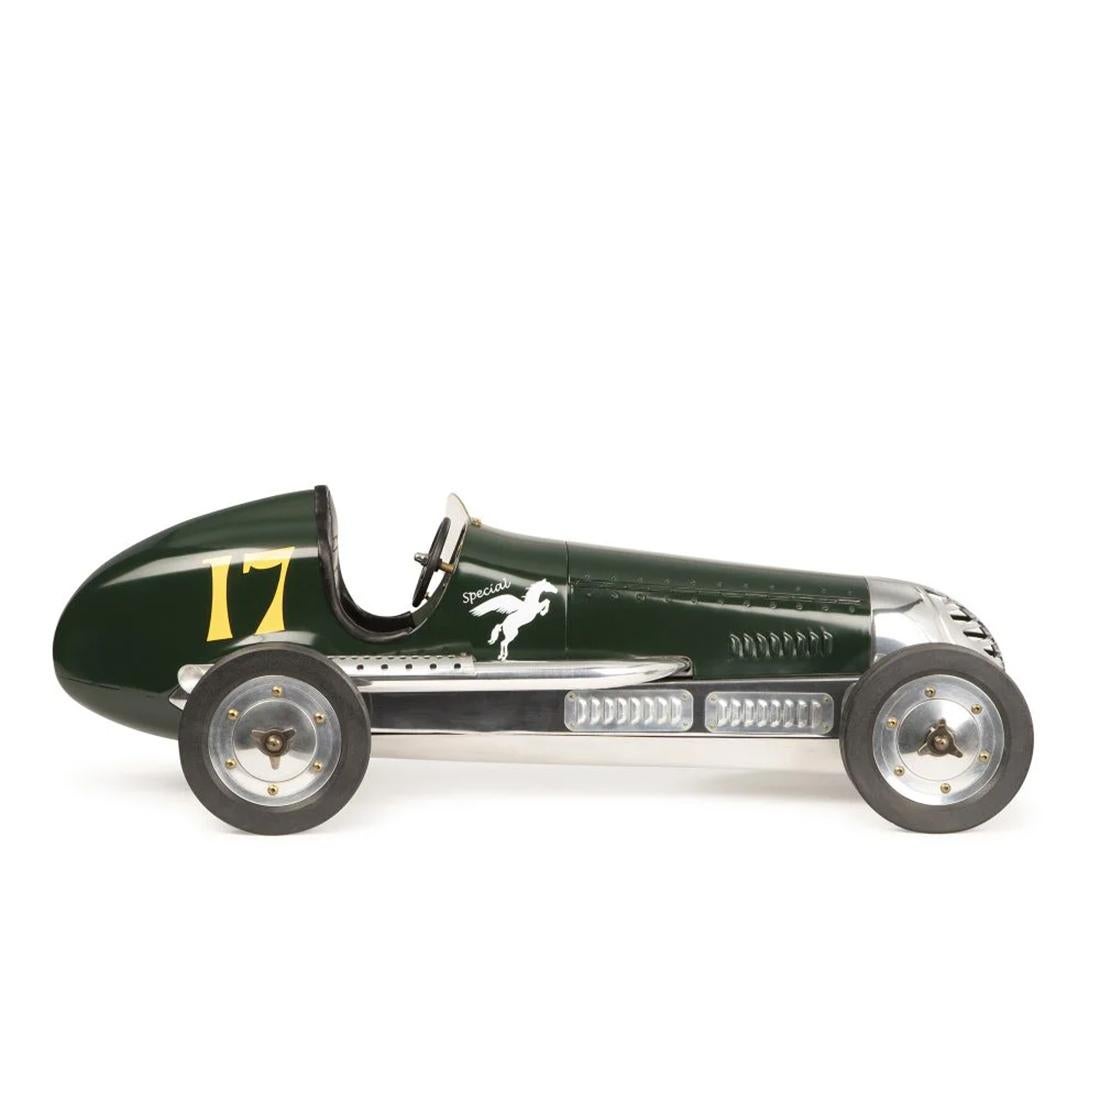 Model Spindizzies Green Racing with aluminium structure,
with plastic and aluminium details. Model in green paint finish.